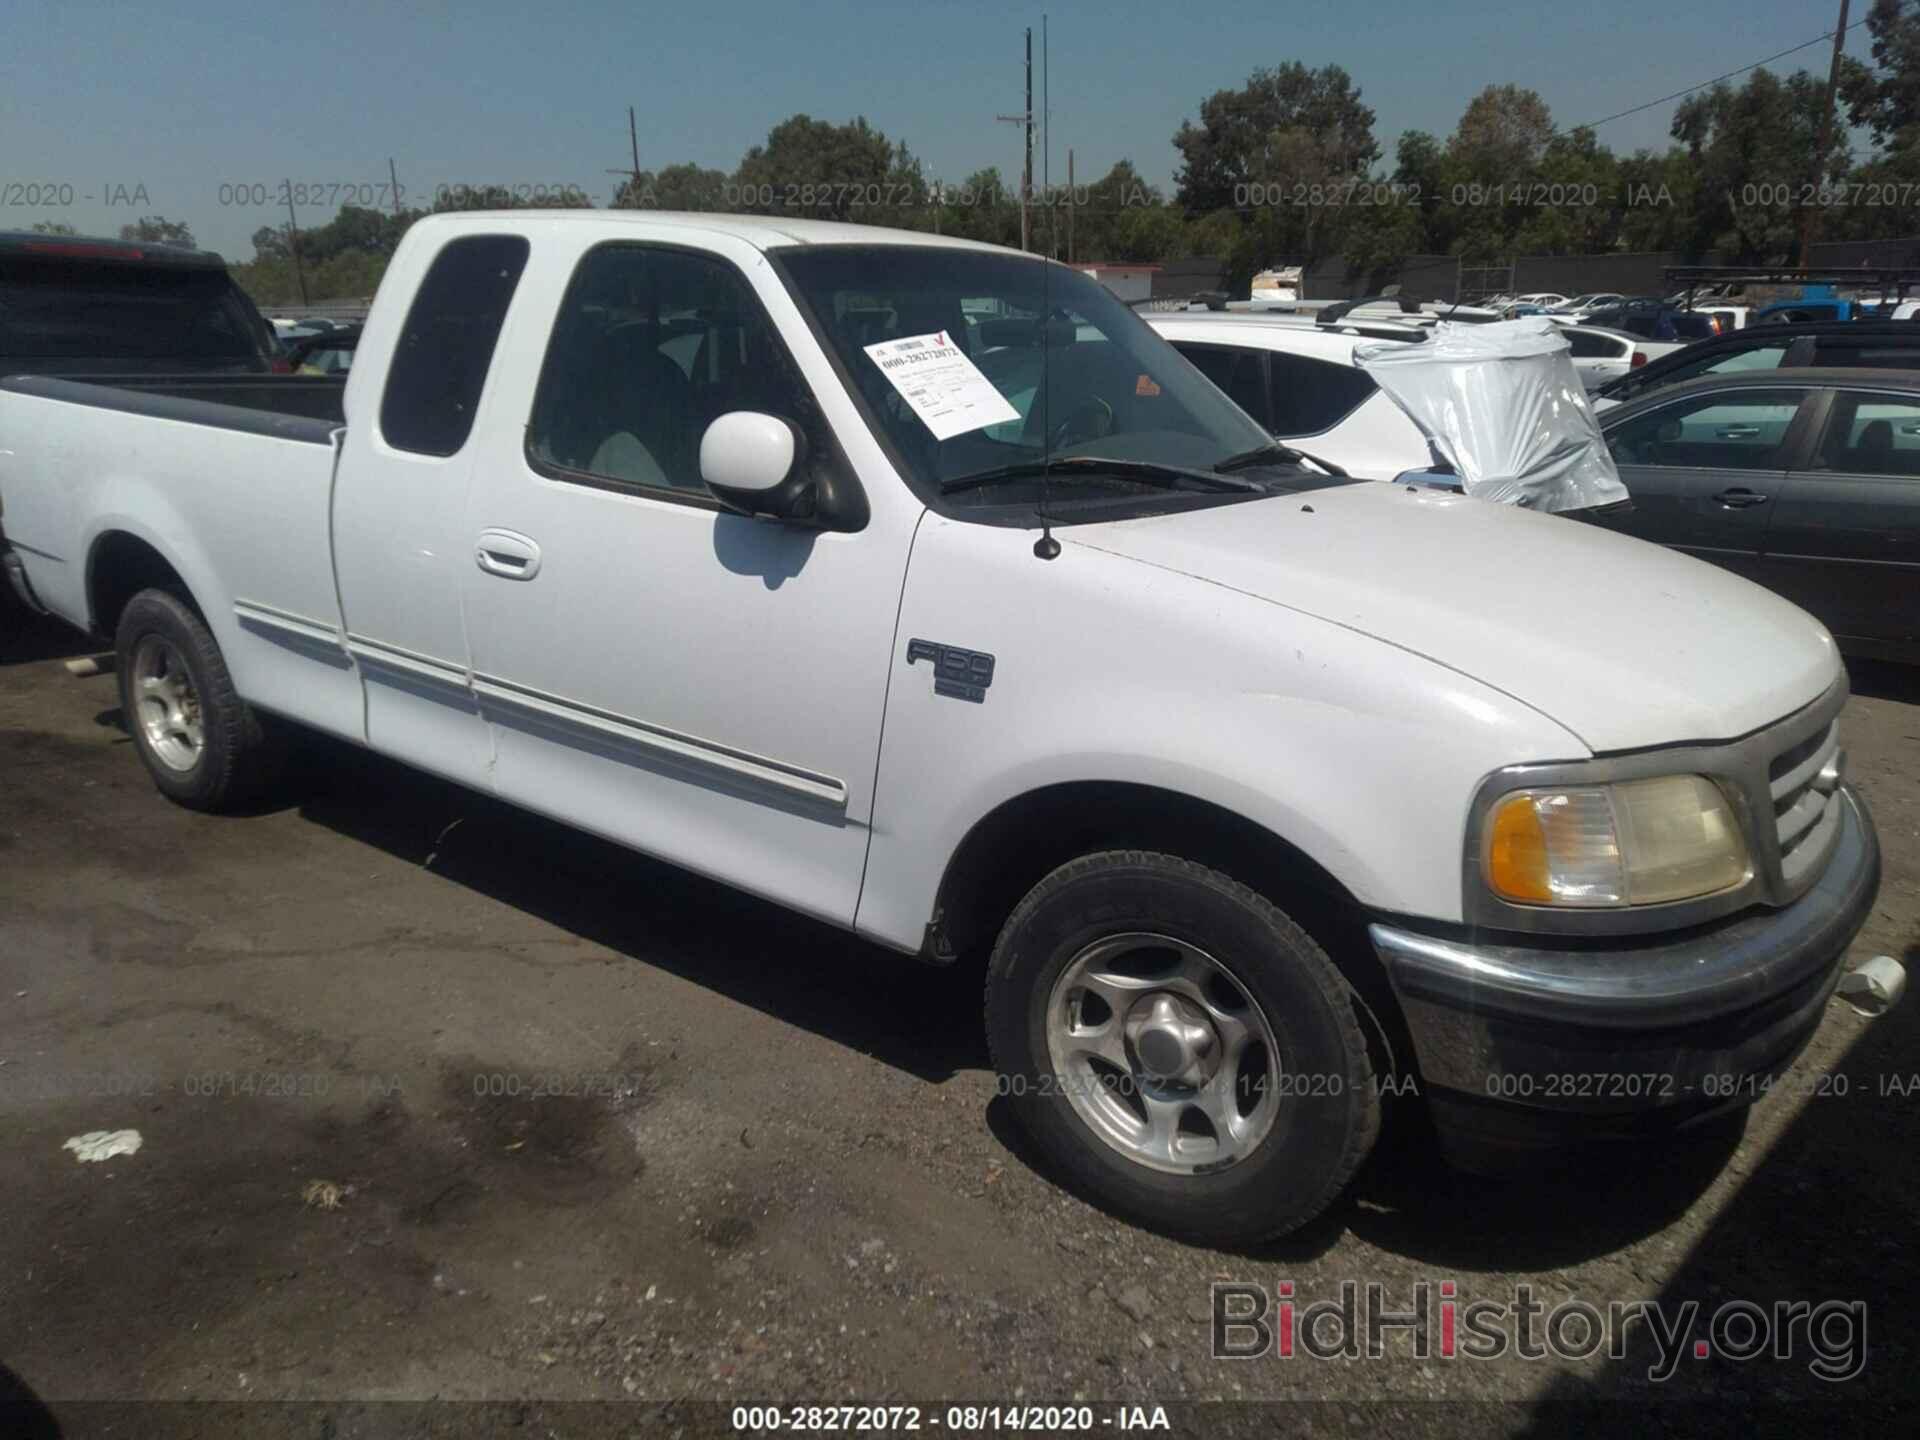 Photo 1FTZX1764WNA72057 - FORD F-150 1998